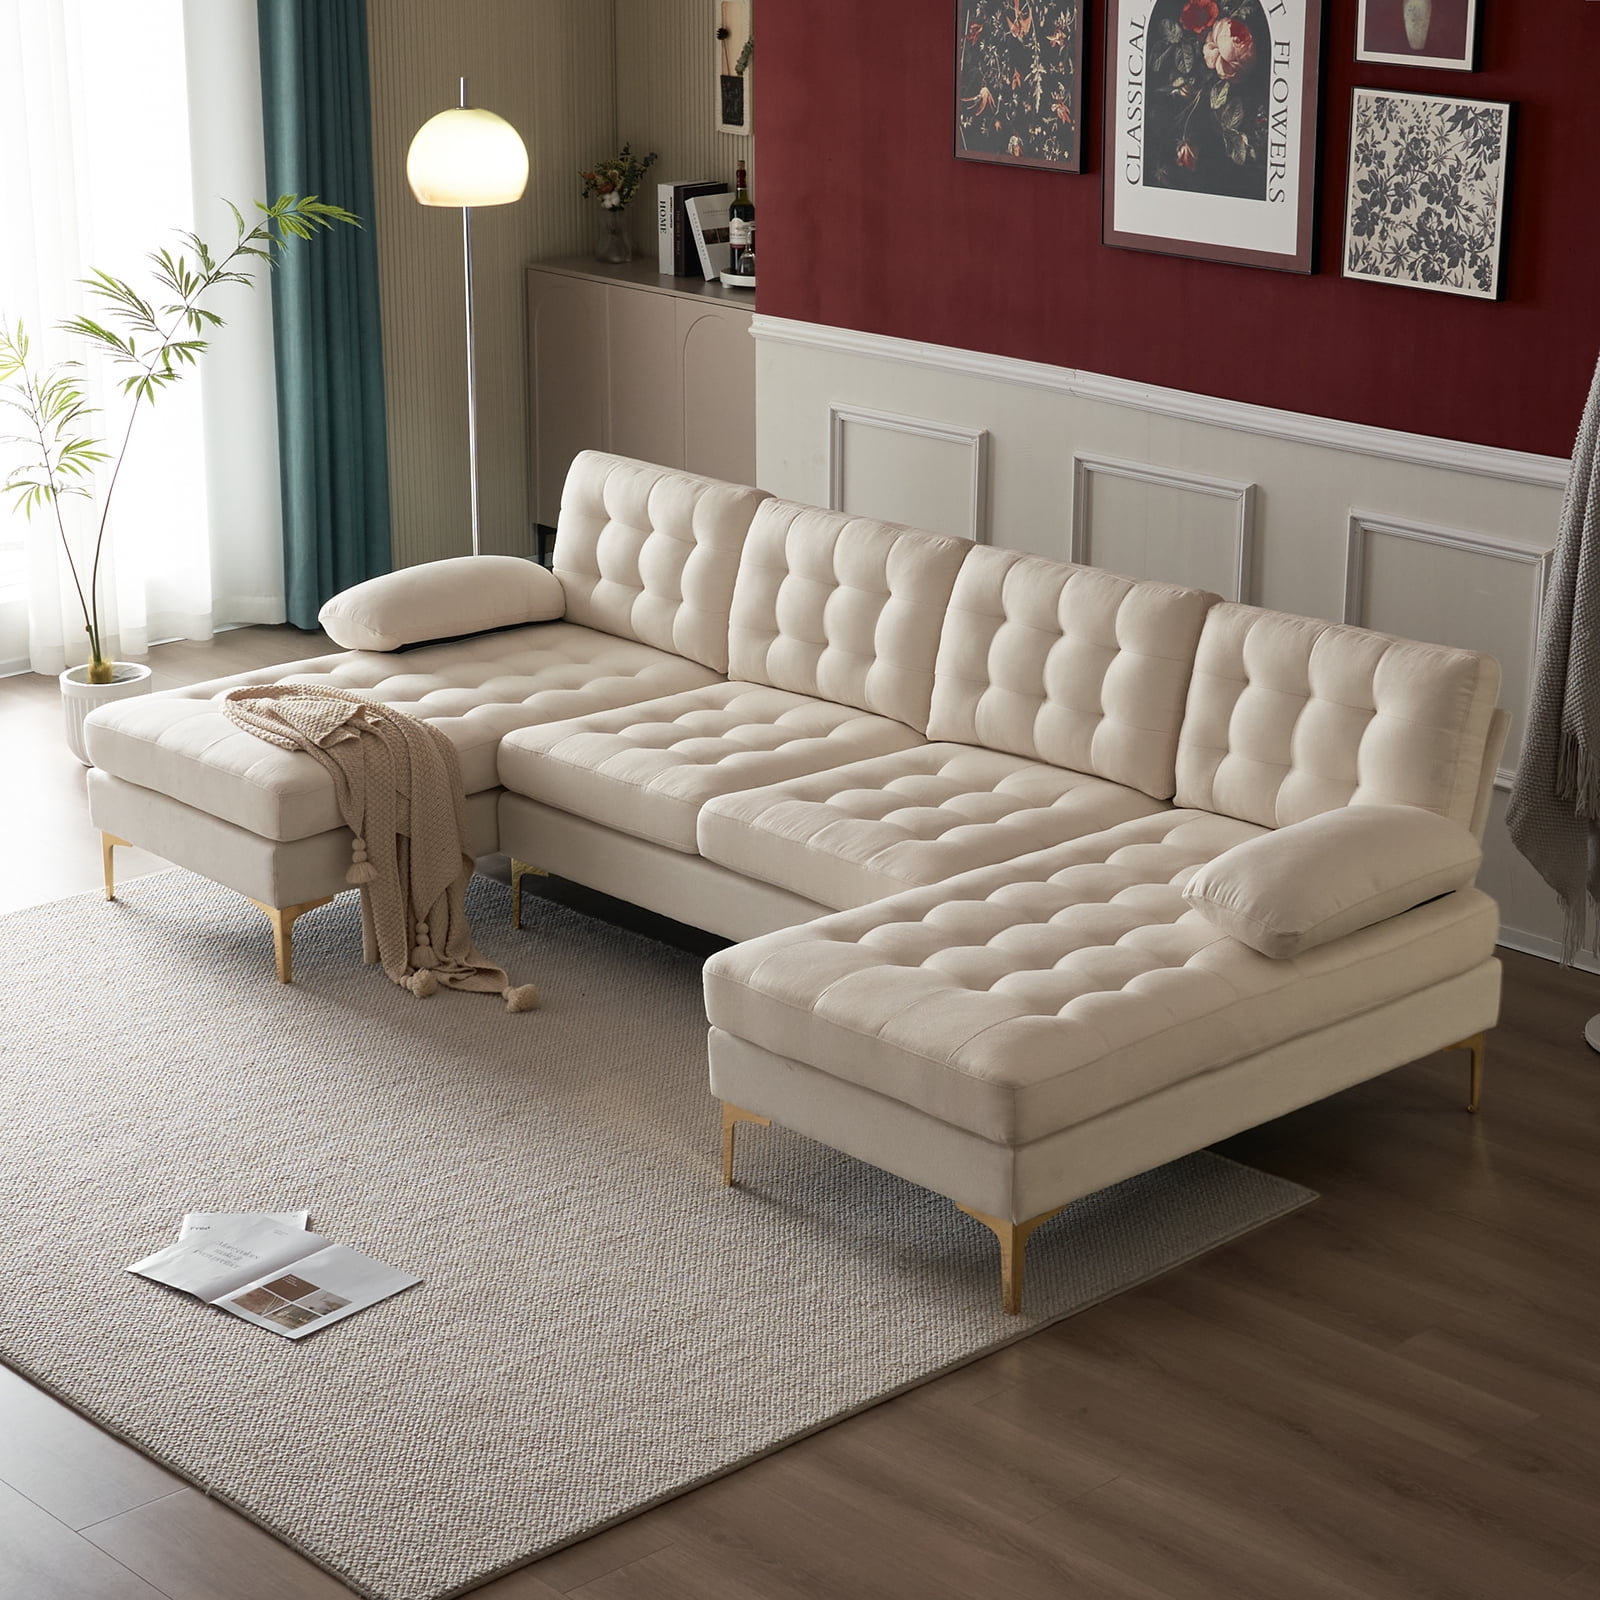 vier keer nachtmerrie katoen Ktaxon Modern U-Shape Sectional Sofa, Tufted Linen Fabric Sectional Couch,  Double Wide Chaise Lounge Couch with Metal Feet for Apartment Living Room  Beige - Walmart.com